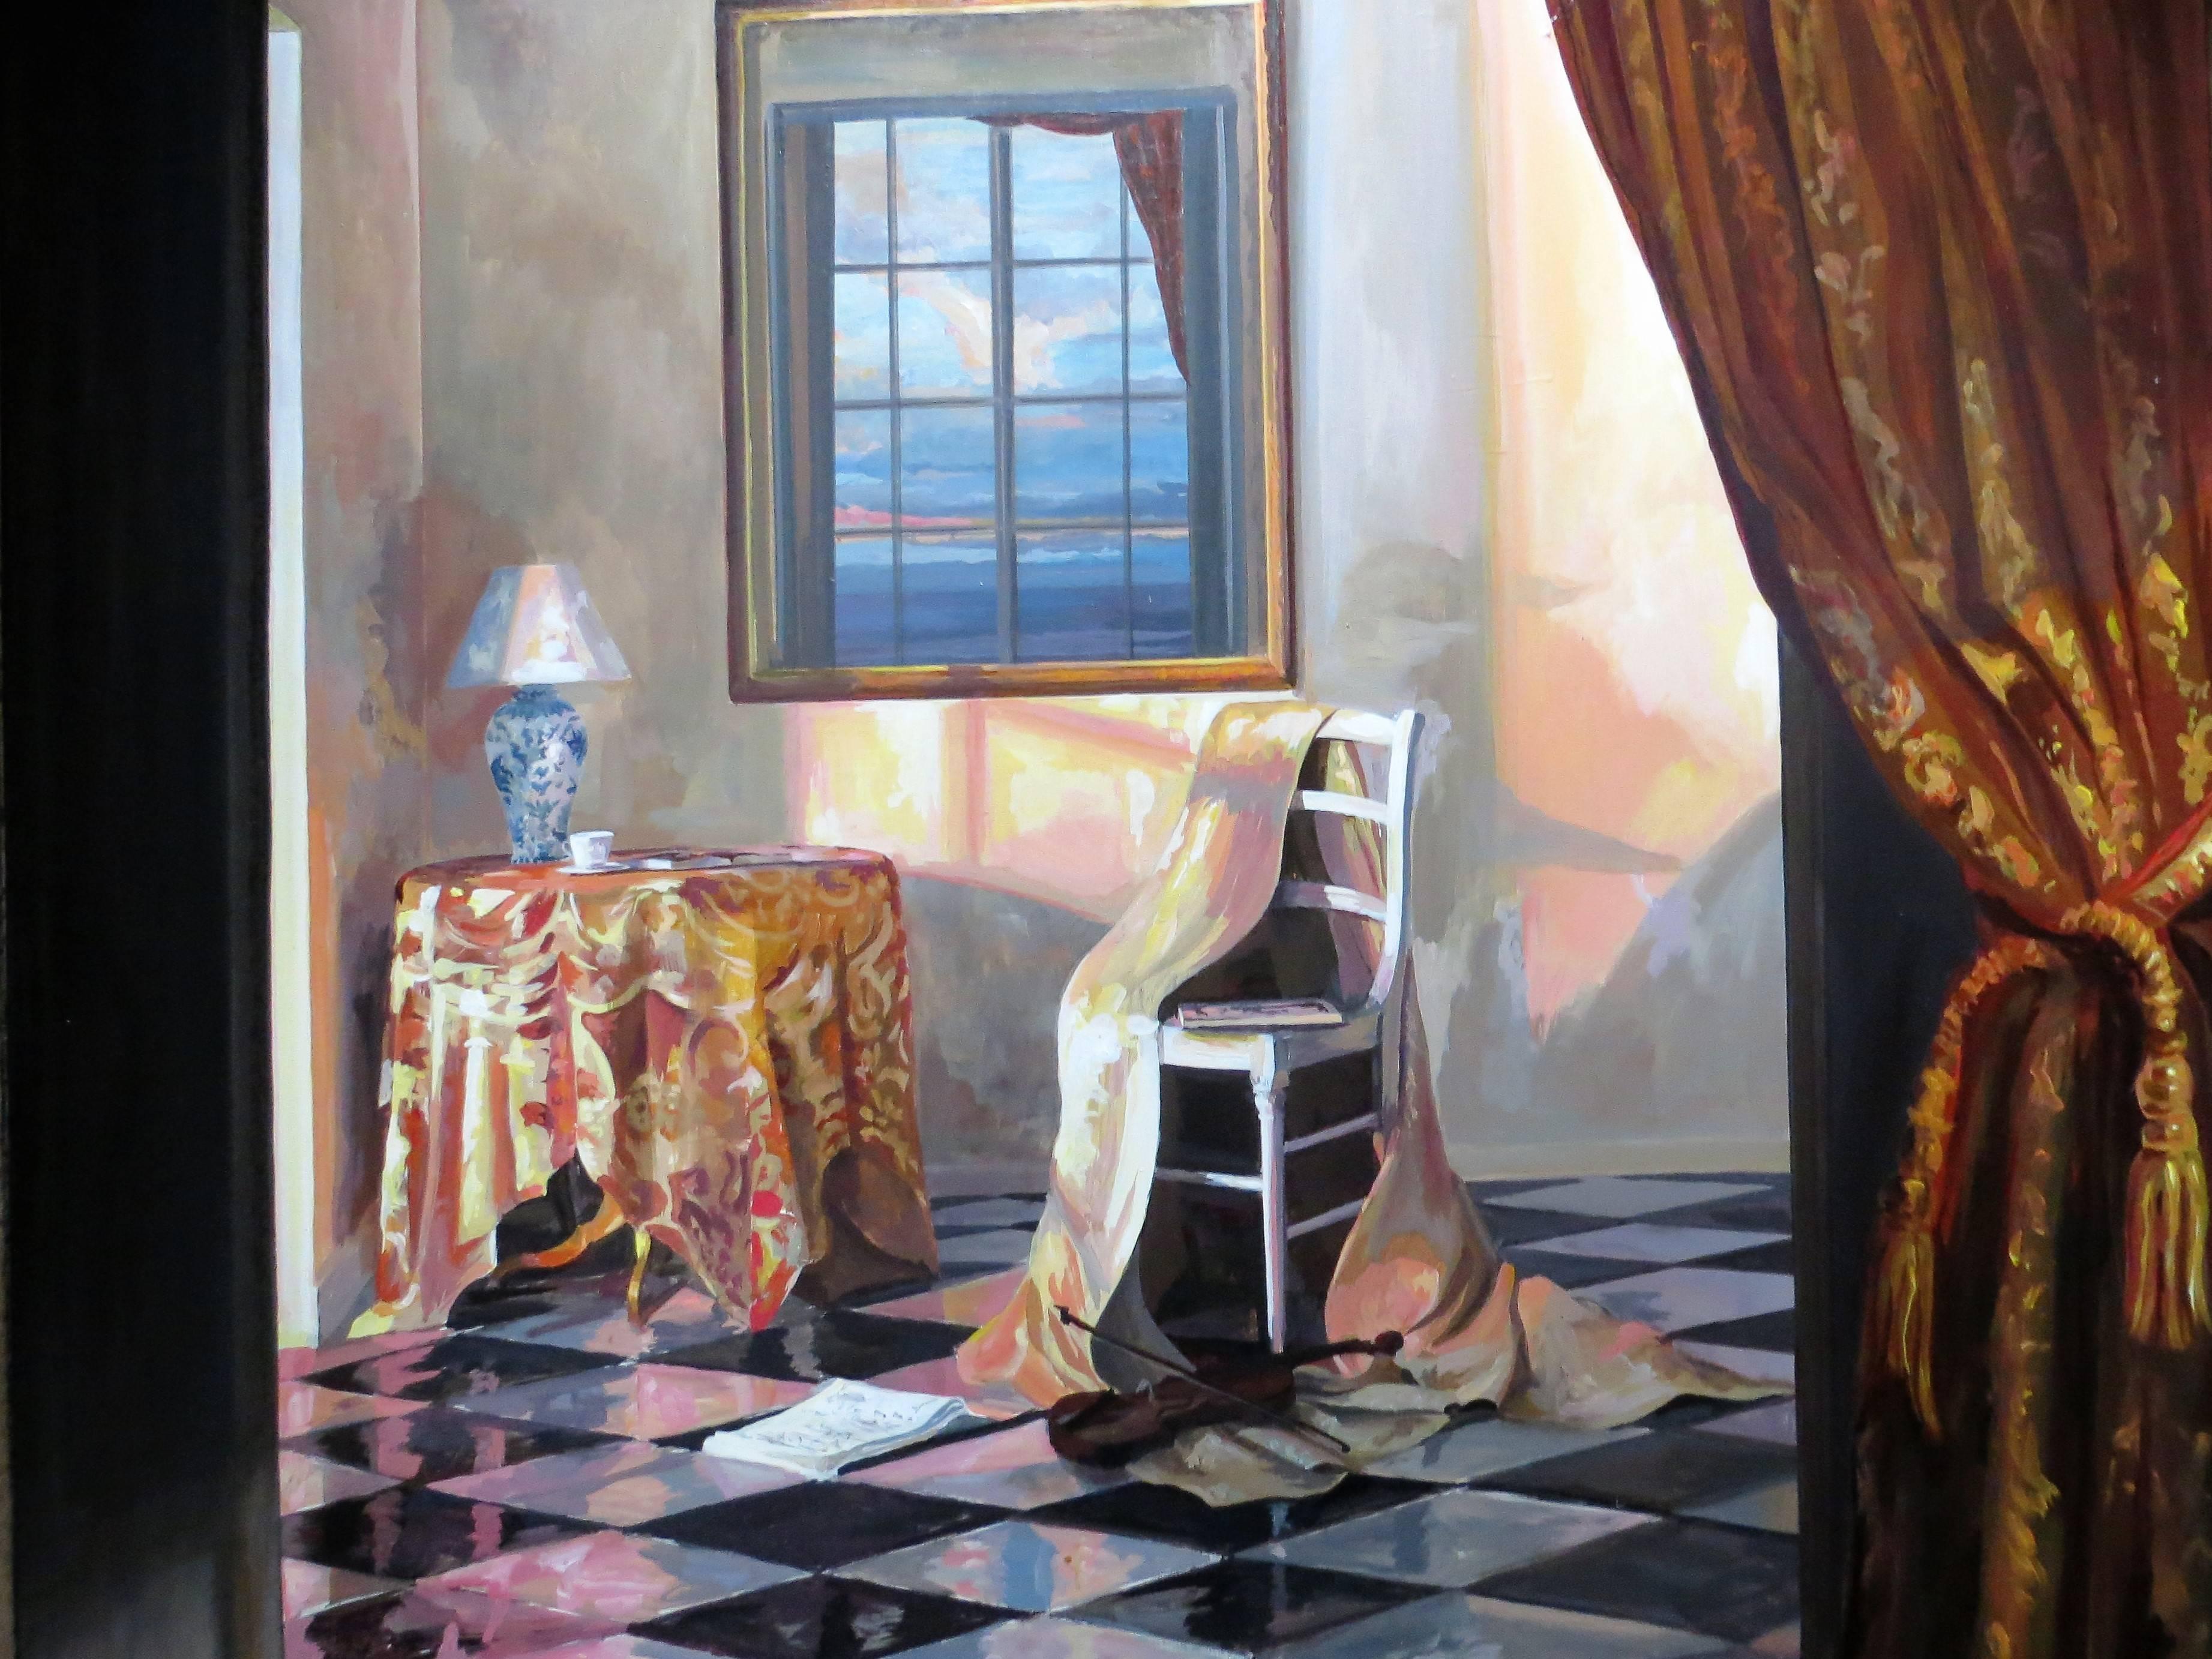 The Chair  - Painting by Alexandre Briganti